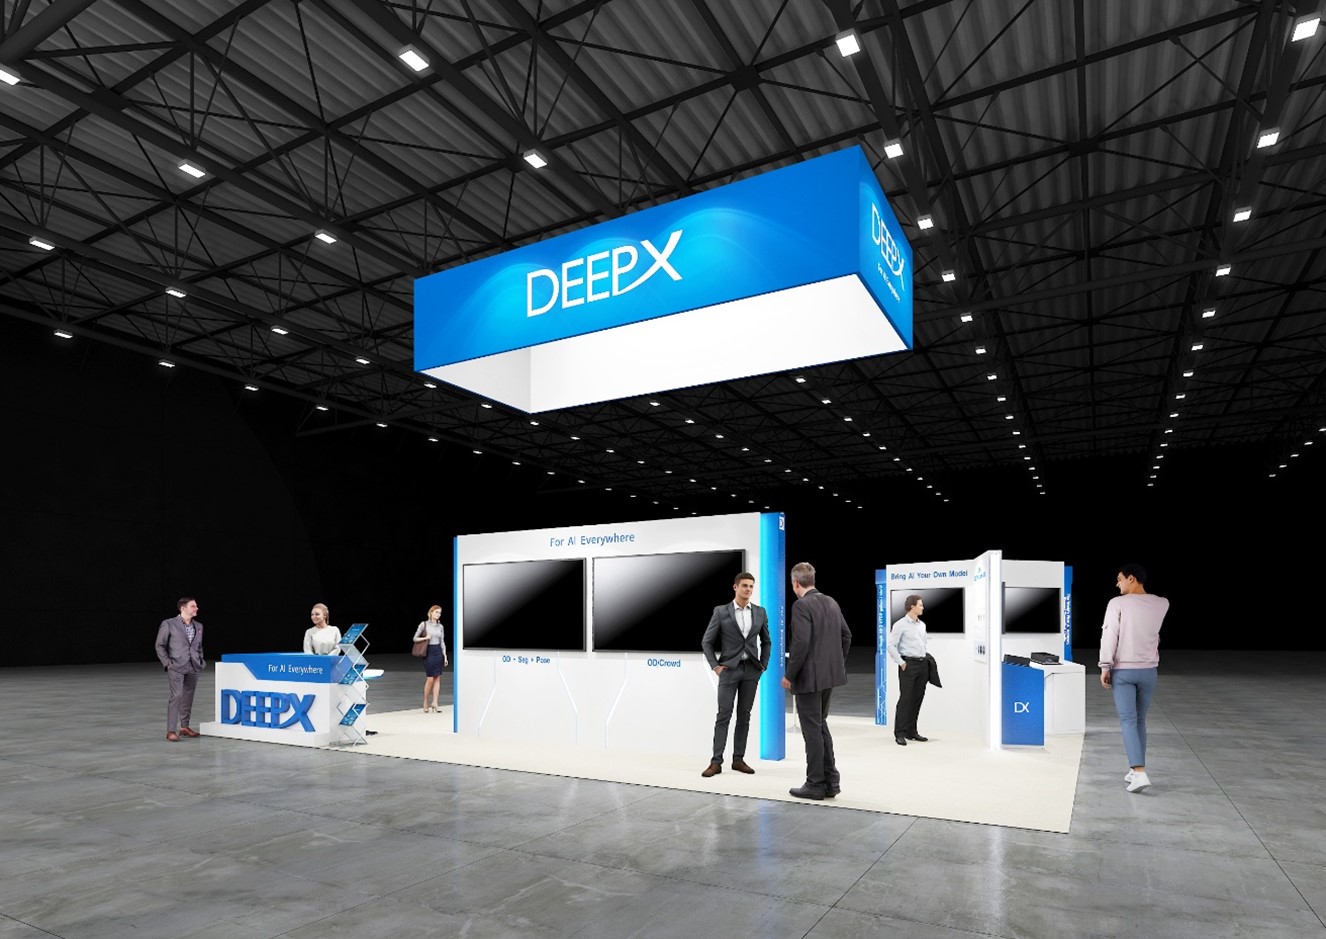 DEEPX Hosts the Largest Showcase at the Embedded Vision Summit, Continues to Expand Global Footprint